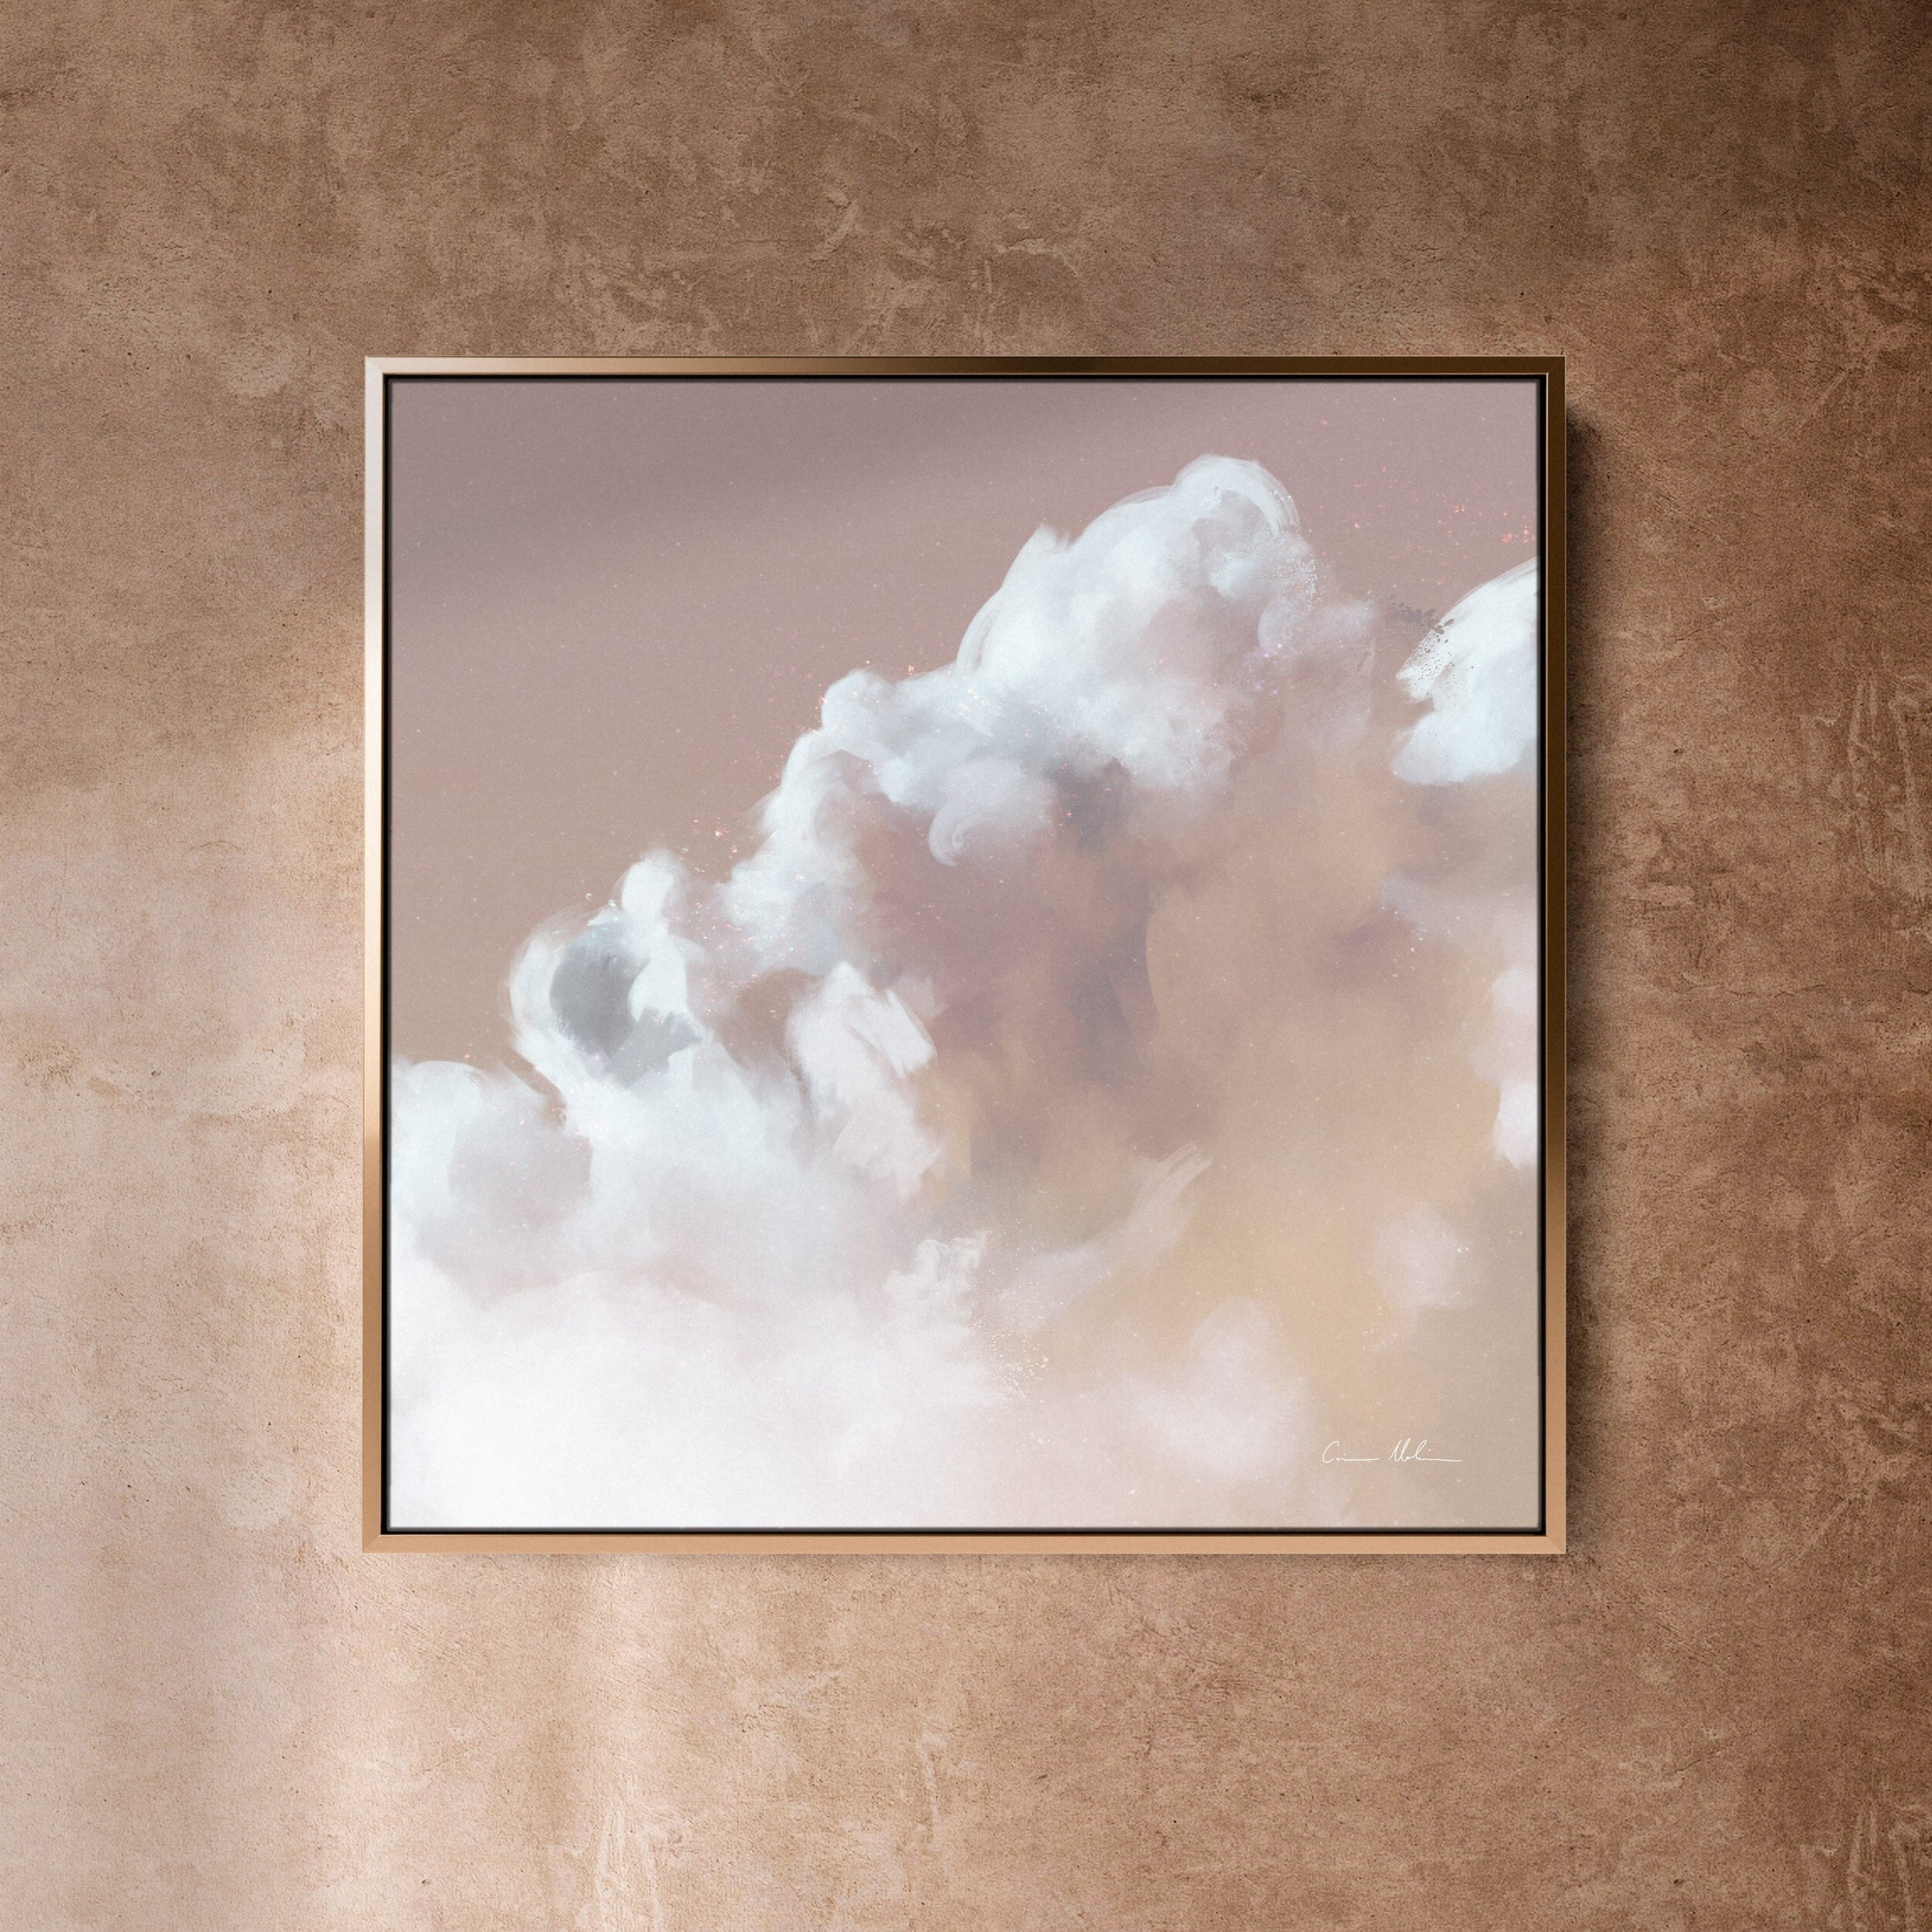 "Chroma Cloud No. 2" Square on Canvas Canvas Wall Art Corinne Melanie Professionally Framed - Gold 20x20in / 50x50cm 